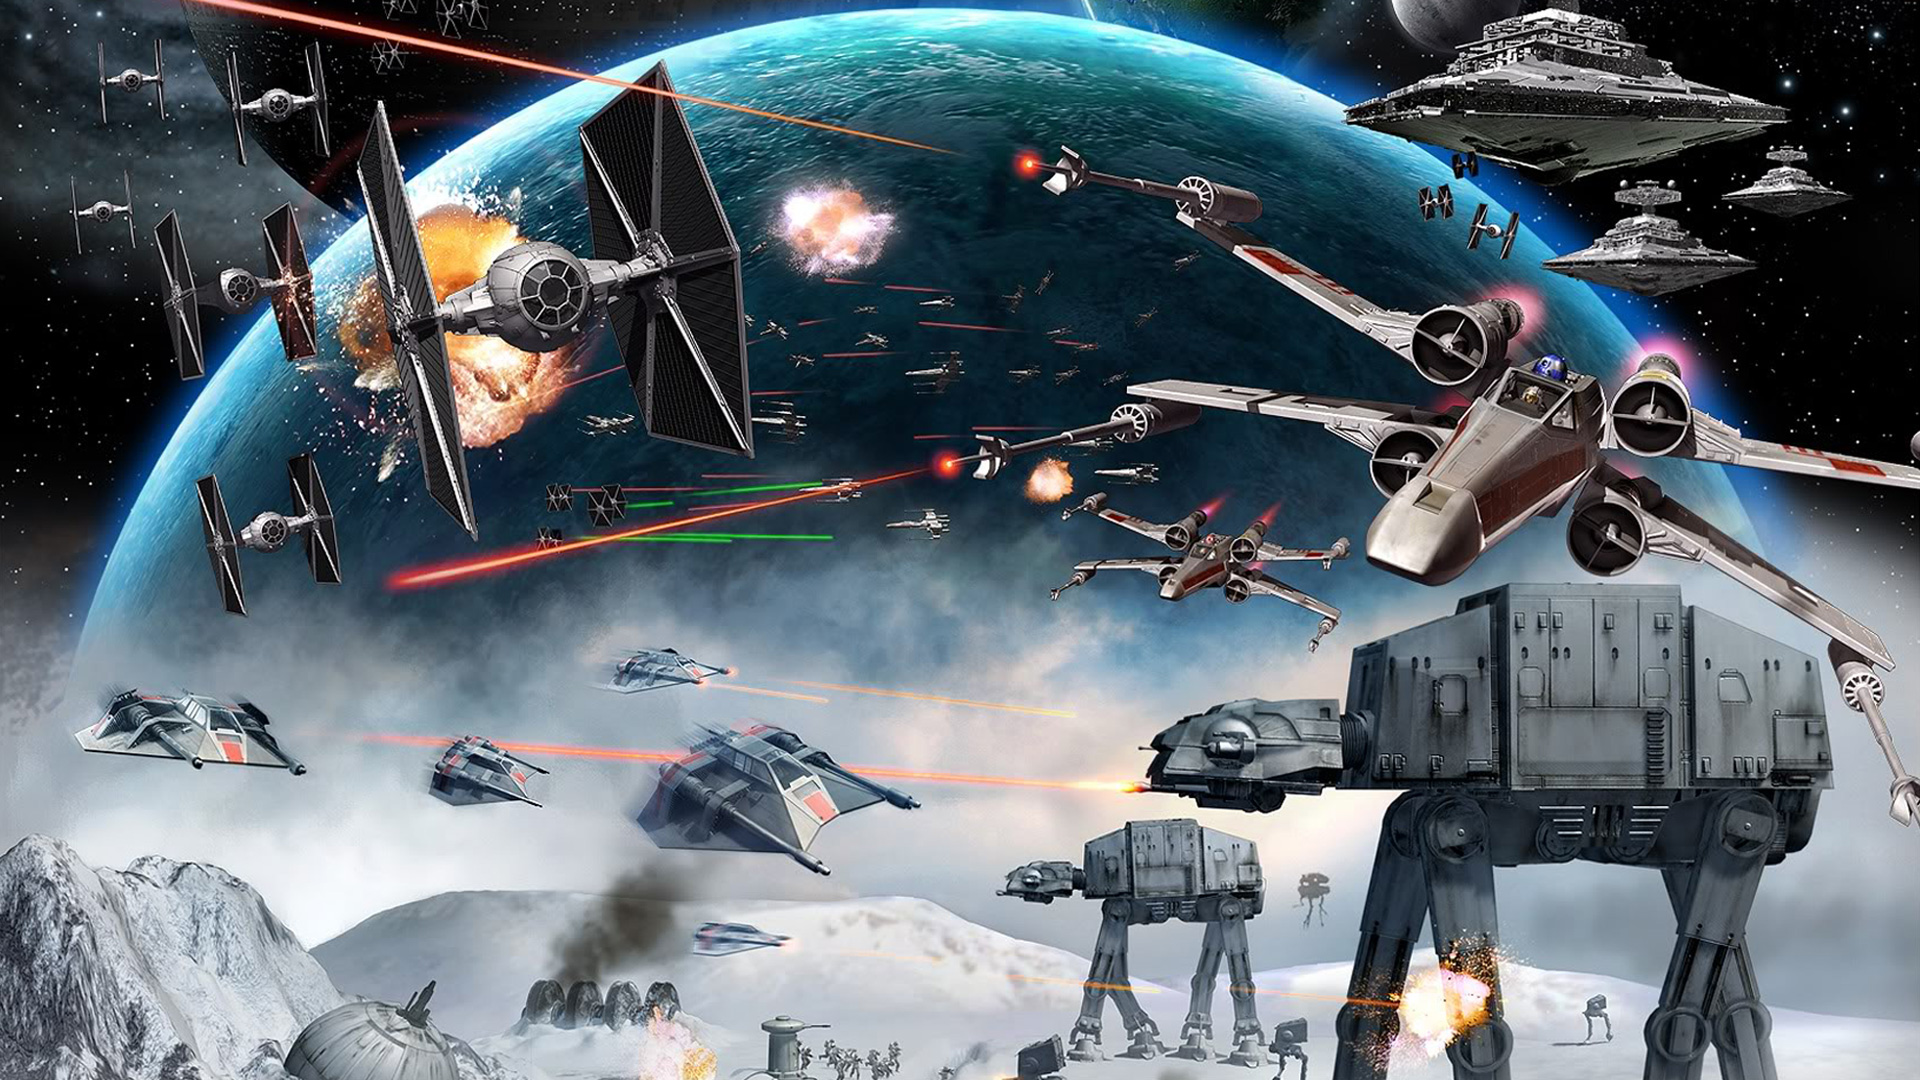 FizX Entertainment Huge Star Wars Wallpapers Collection 1920x1080